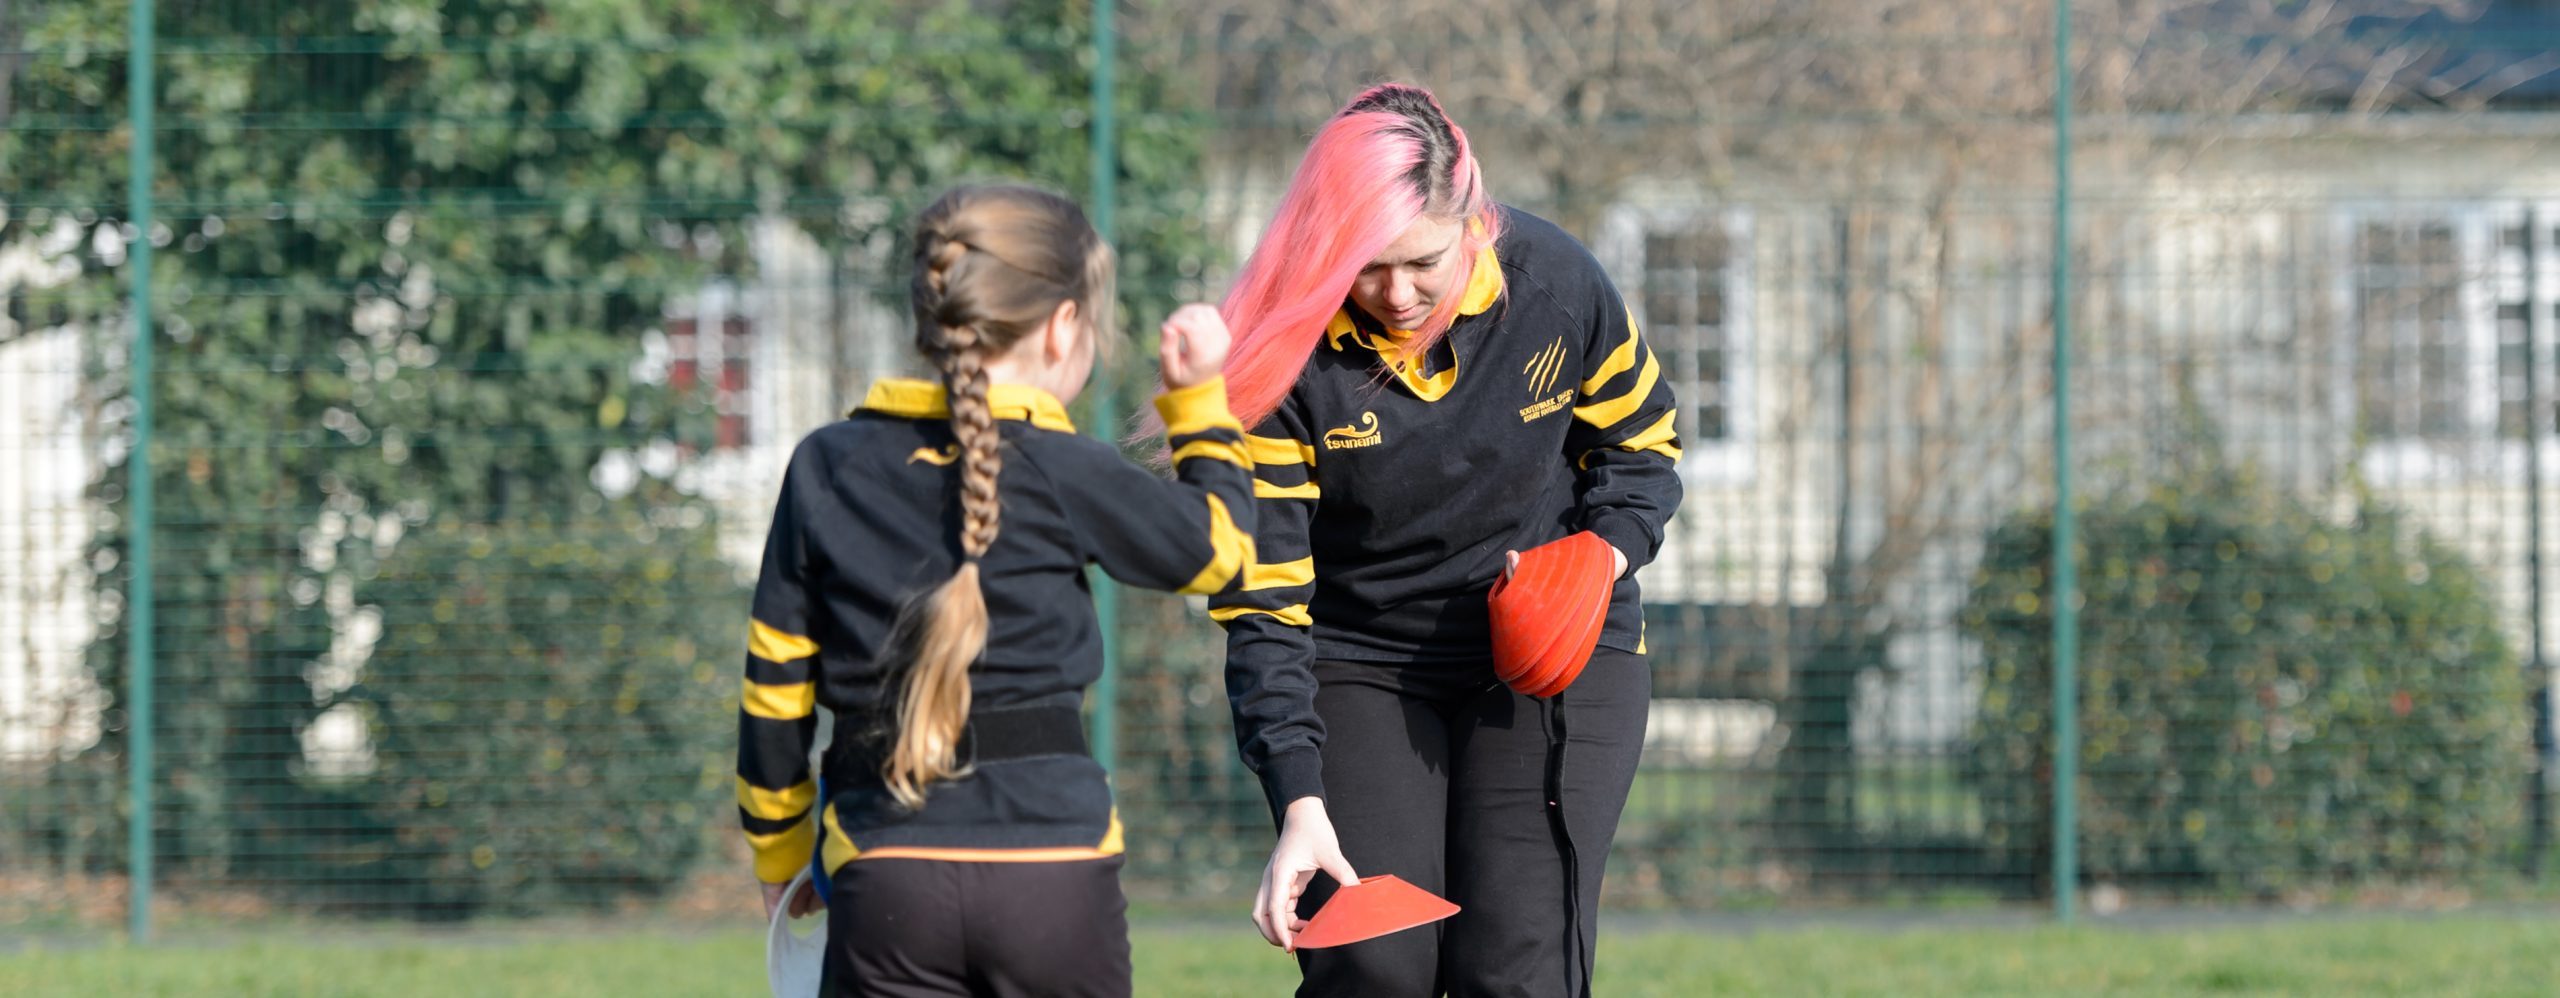 A young girl and a volunteer setting up the pitch for a rugby game